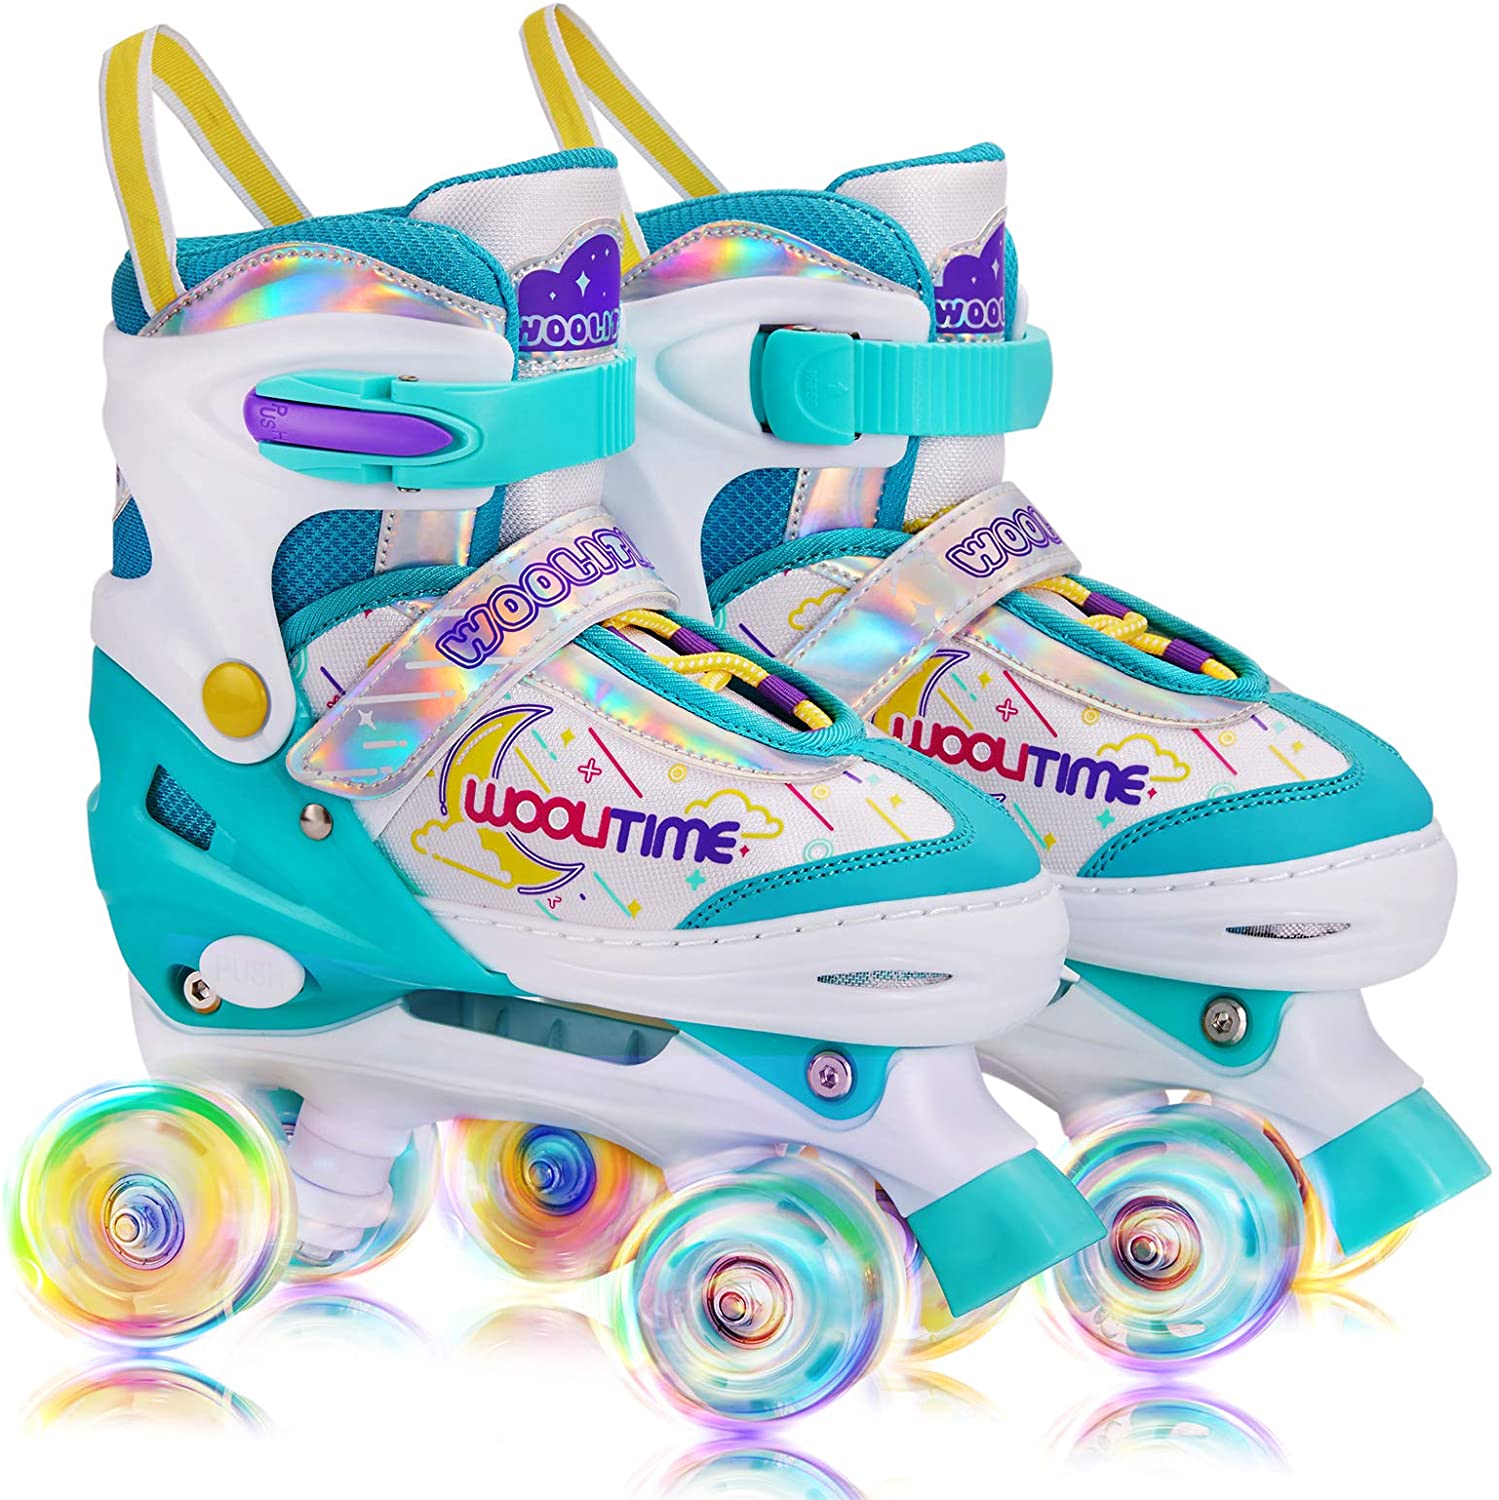 Review of Woolitime Adjustable Roller Skates for Girls and Boys